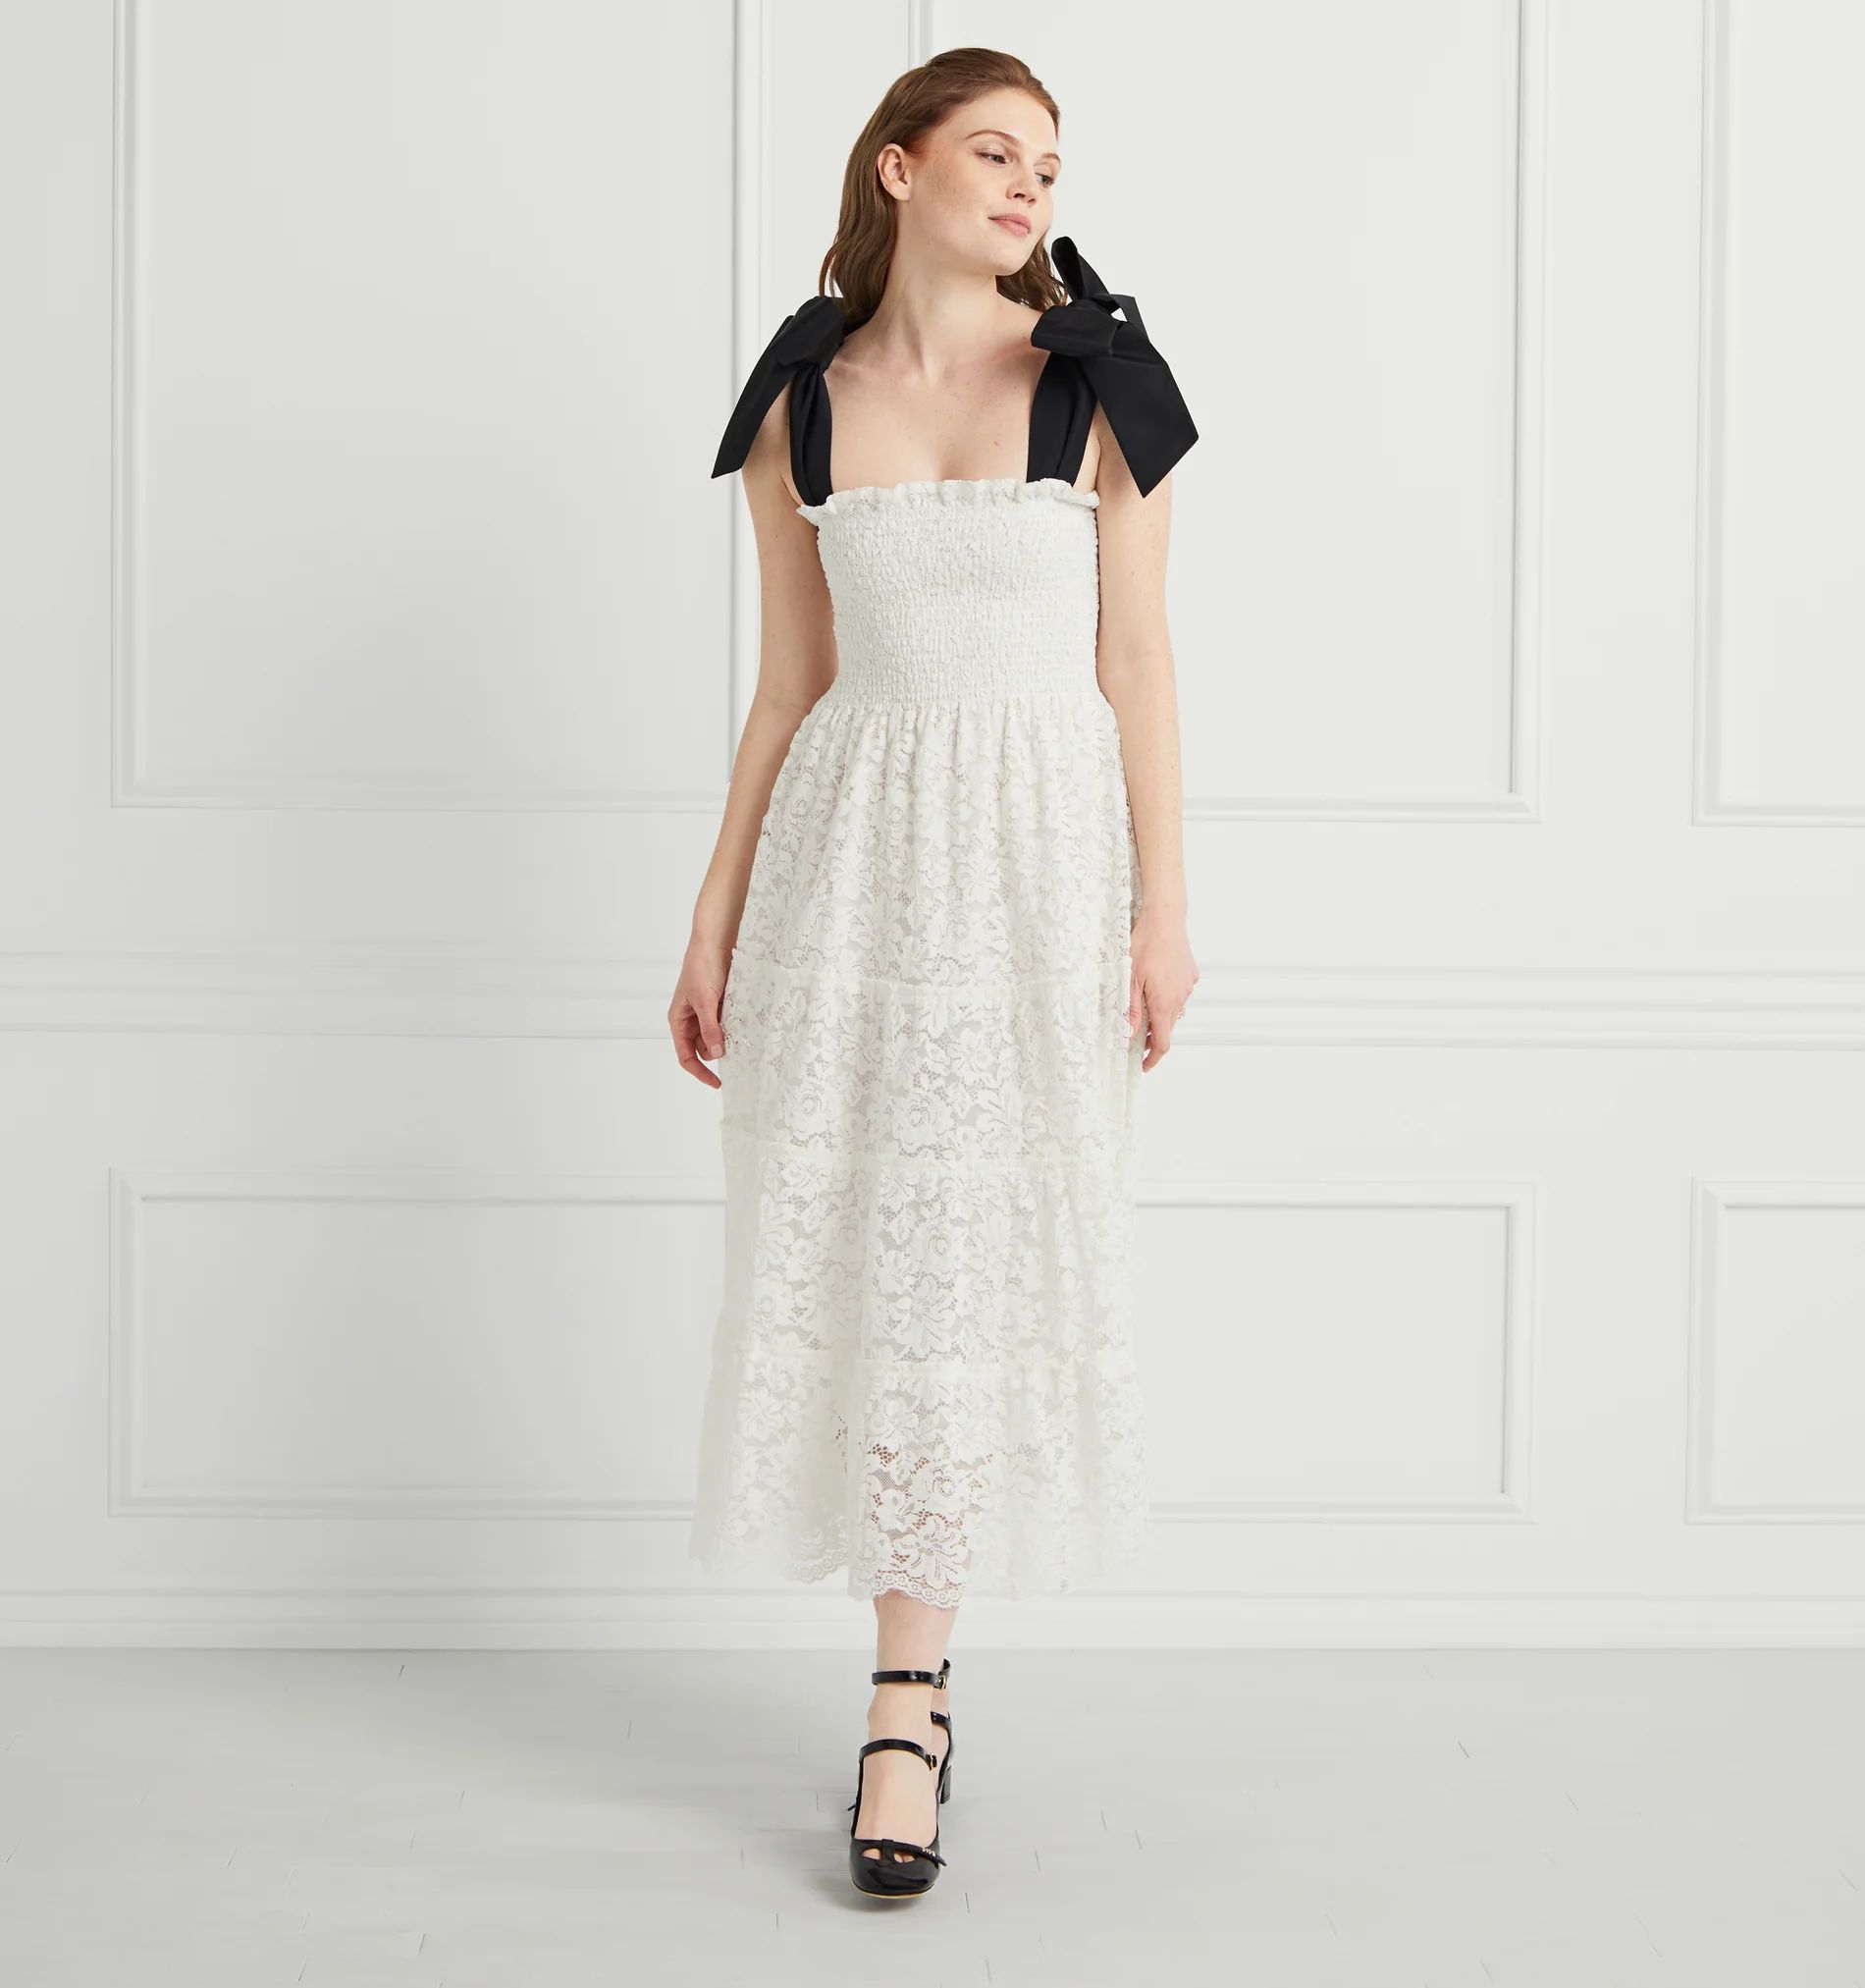 The Lace Ribbon Ellie Nap Dress | Hill House Home